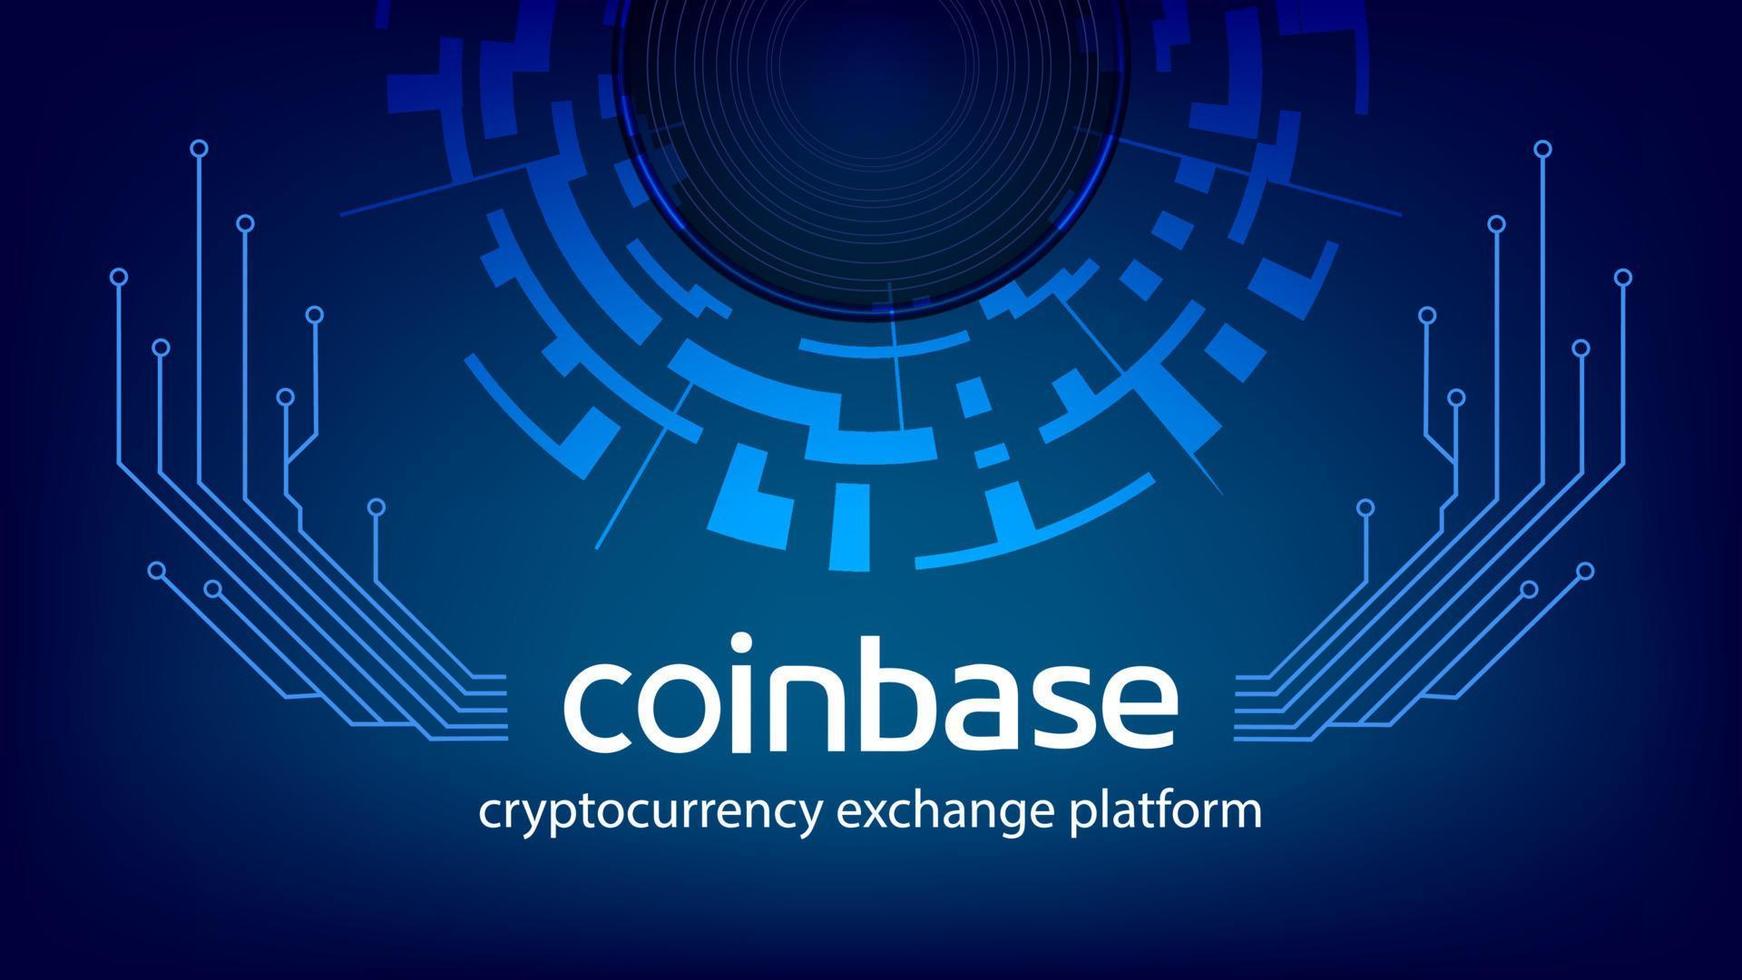 Coinbase cryptocurrency exchange platform name with digital circle and PCB tracks on dark blue background. Crypto stock market banner for news and media. Vector illustration.